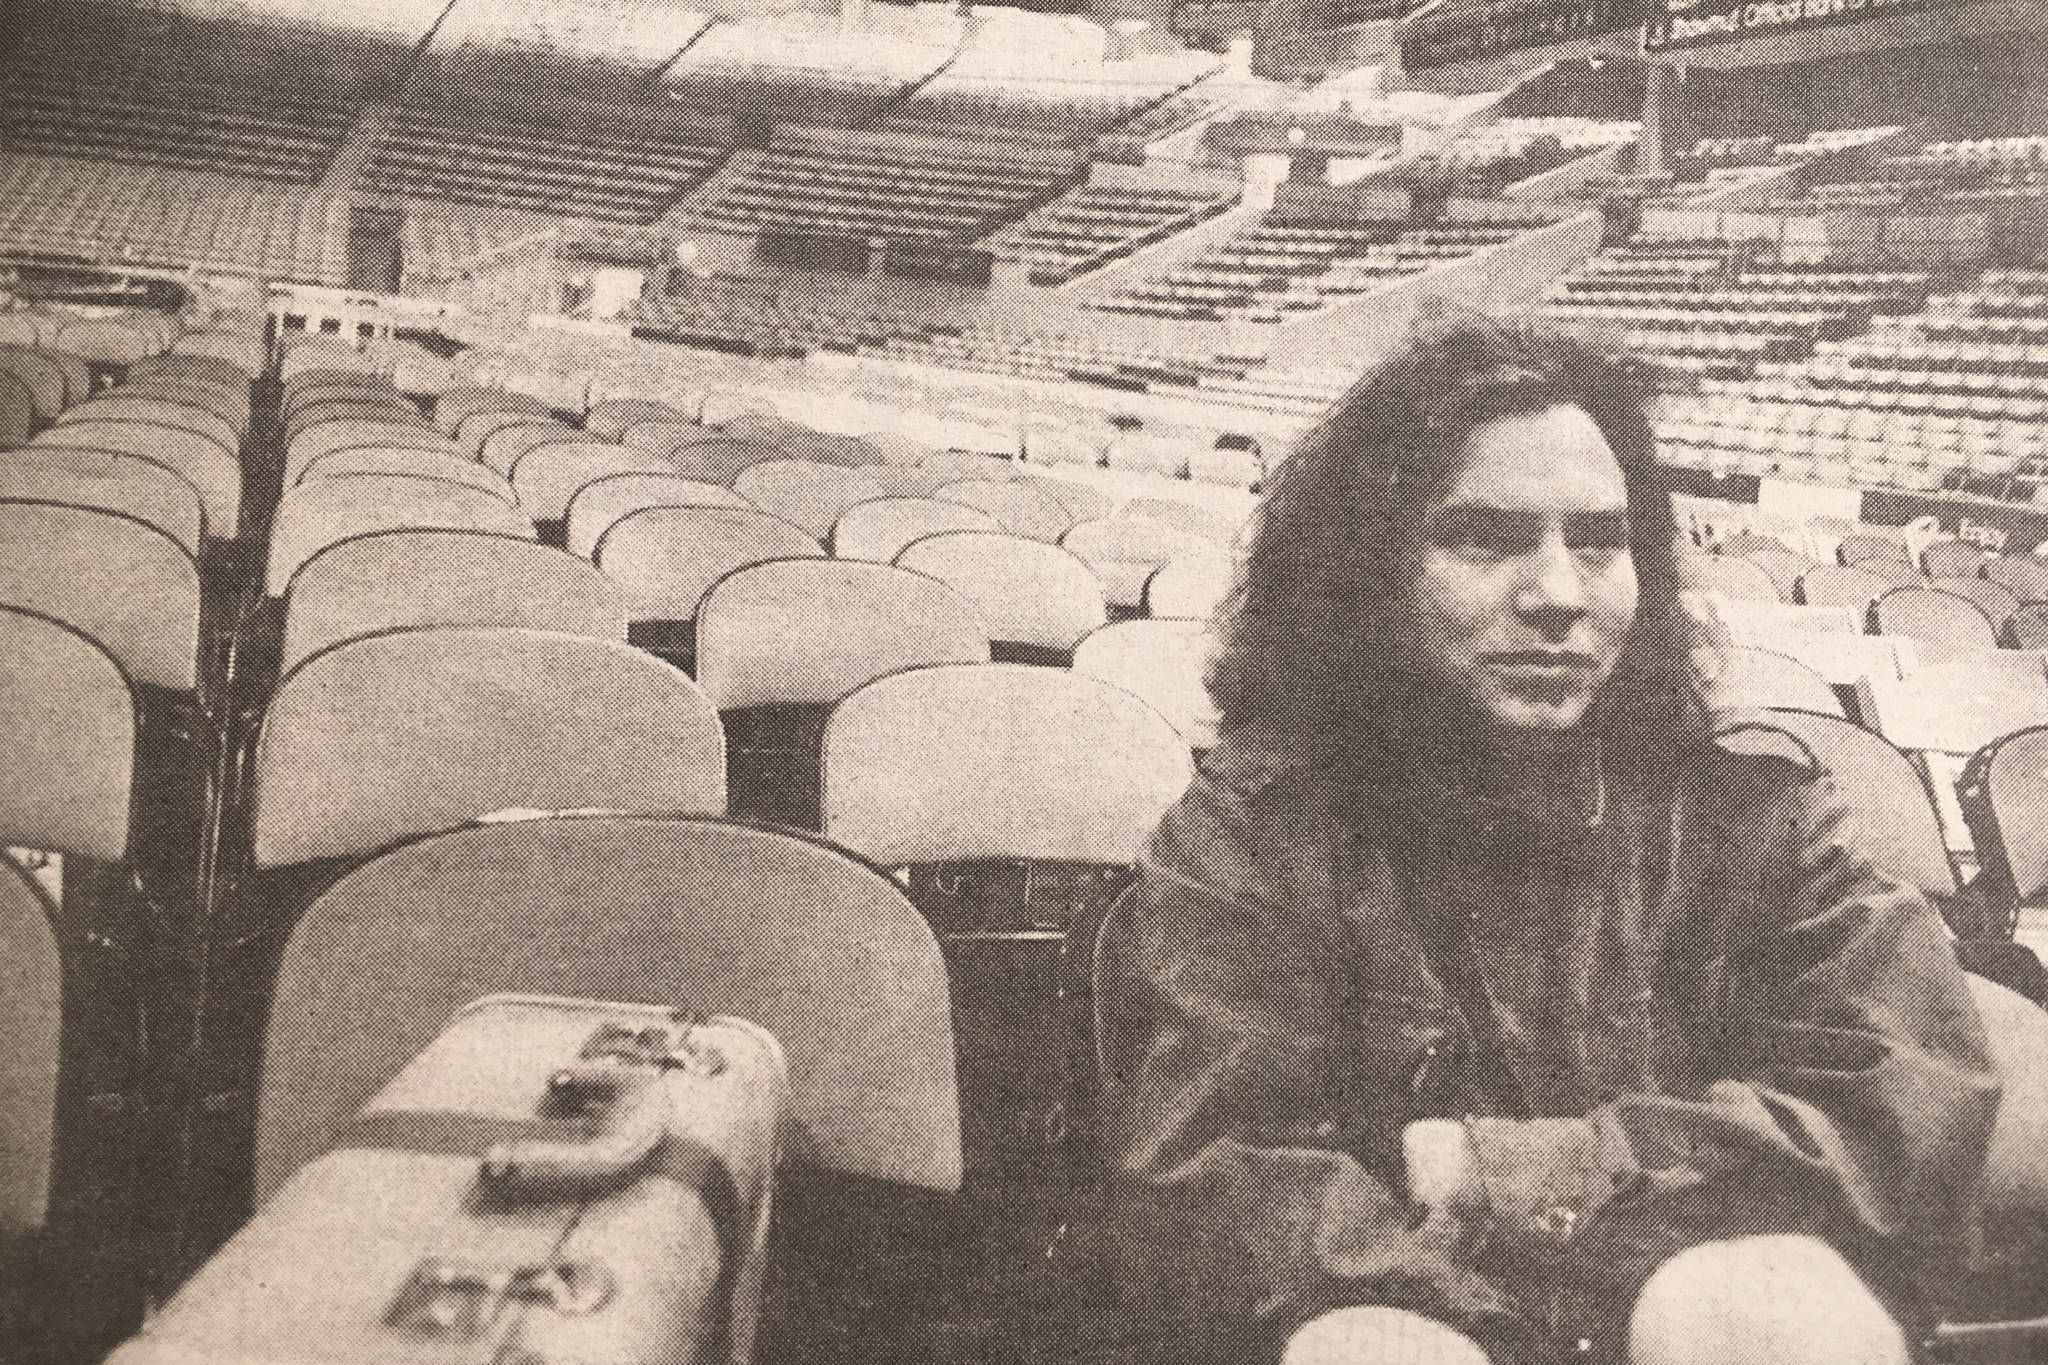 Pearl Jam lead singer Eddie Vedder and a sea of empty seats. Photo by Lance Mercer